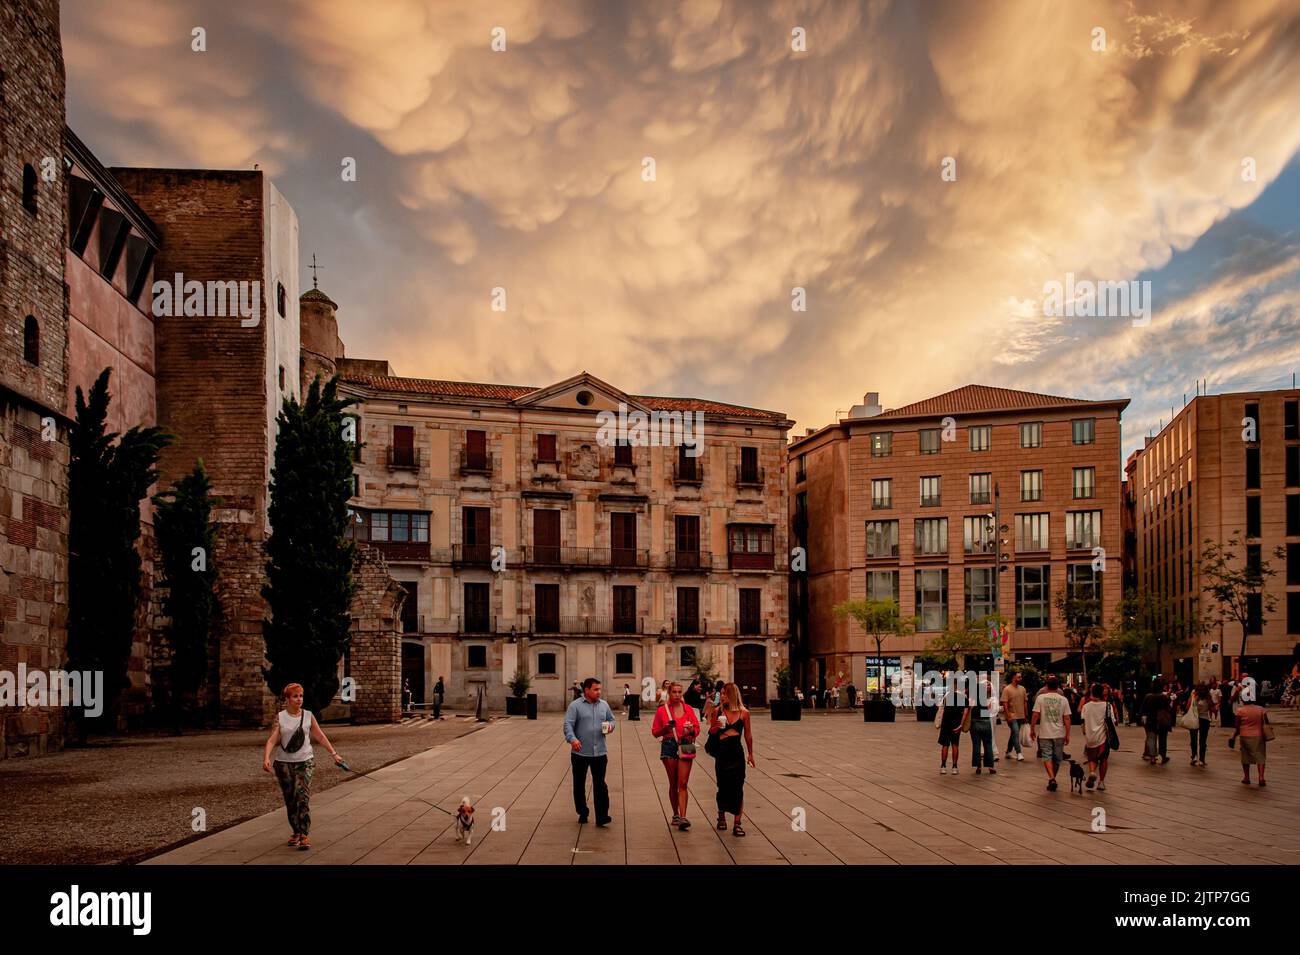 August 31, 2022, Barcelona, Spain: People walk along Cathedral square in the Gothic Quarter of Barcelona under a cloudy colorful sky after a day of sun and heavy rains. Credit: Jordi Boixareu/Alamy Live News Stock Photo